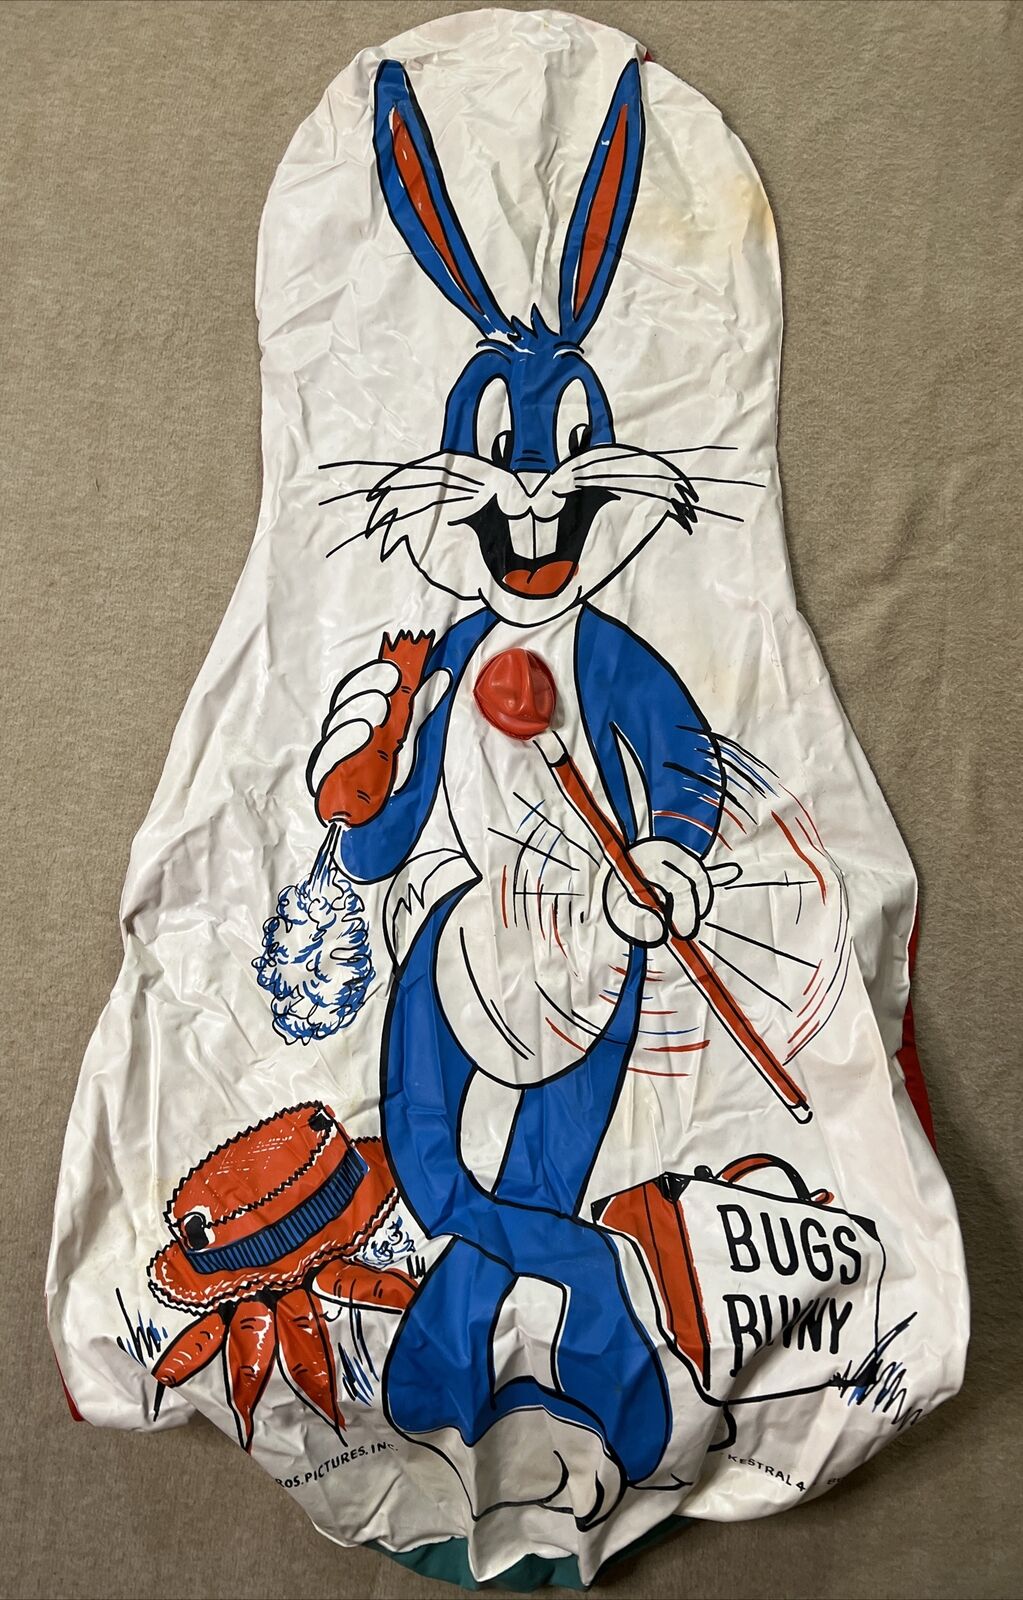 Vintage Warner Bros Bugs Bunny Weighted Punching Bag 4 Foot Tall